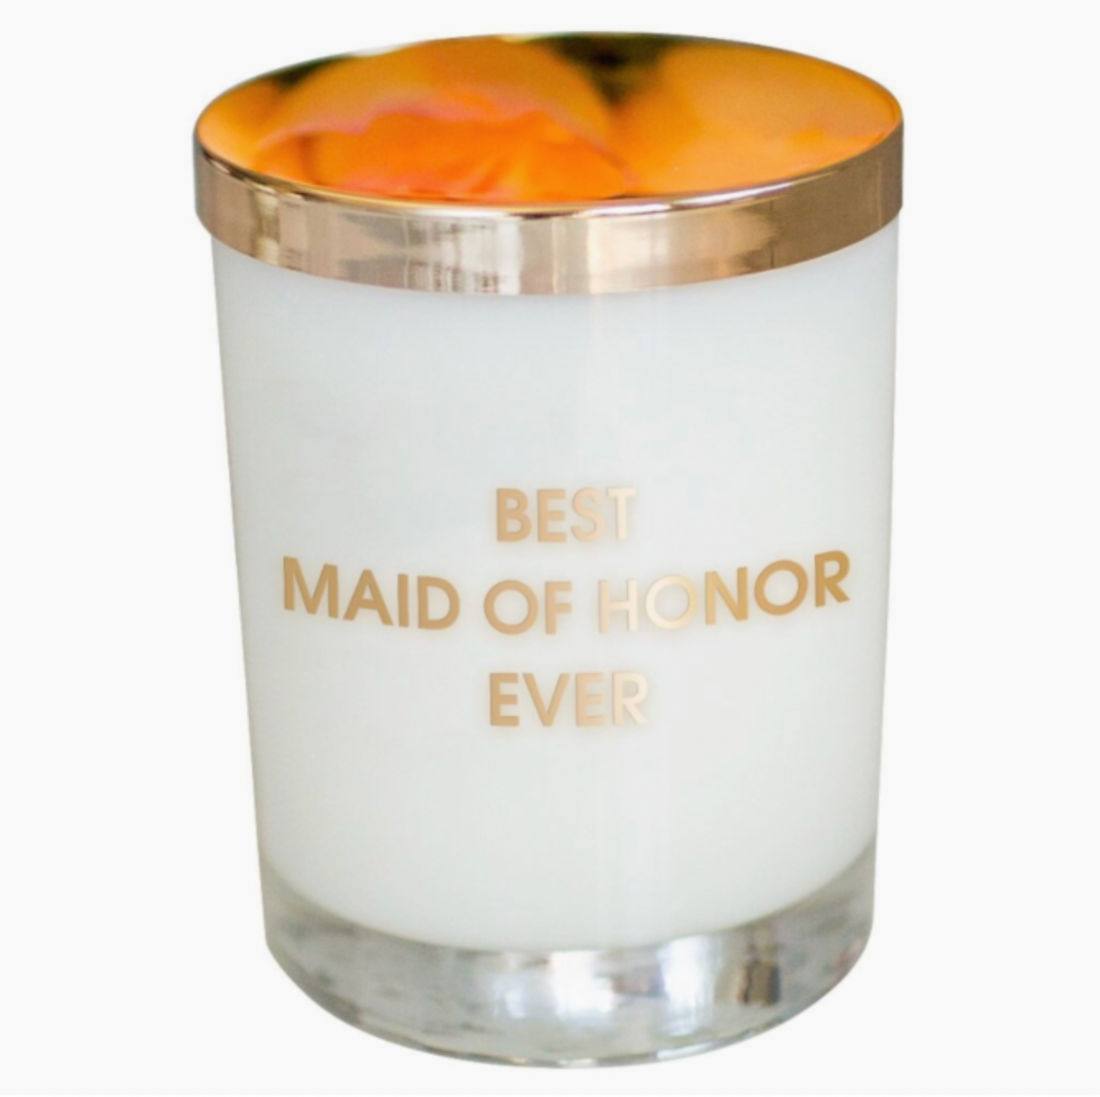 Best Maid of Honor Candle